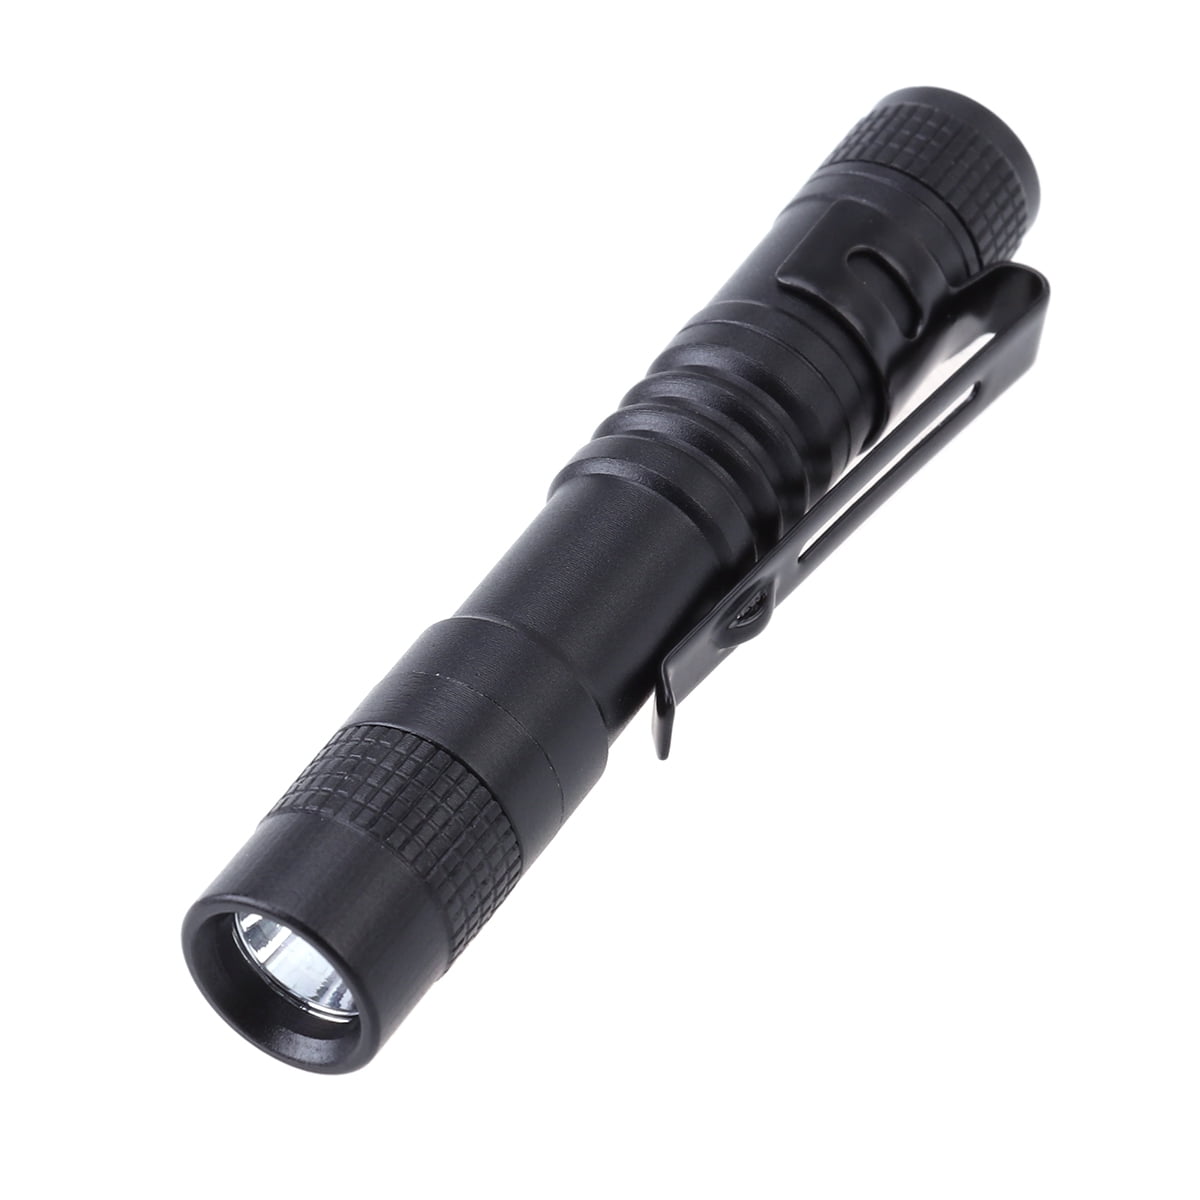 CZS LED Flashlight Penlight 1000 Lumens Battery-Powered Handheld Pen Light Pocket Torch Powered by 2AAA Battery,5 PCS (Battery Not Included) - 1